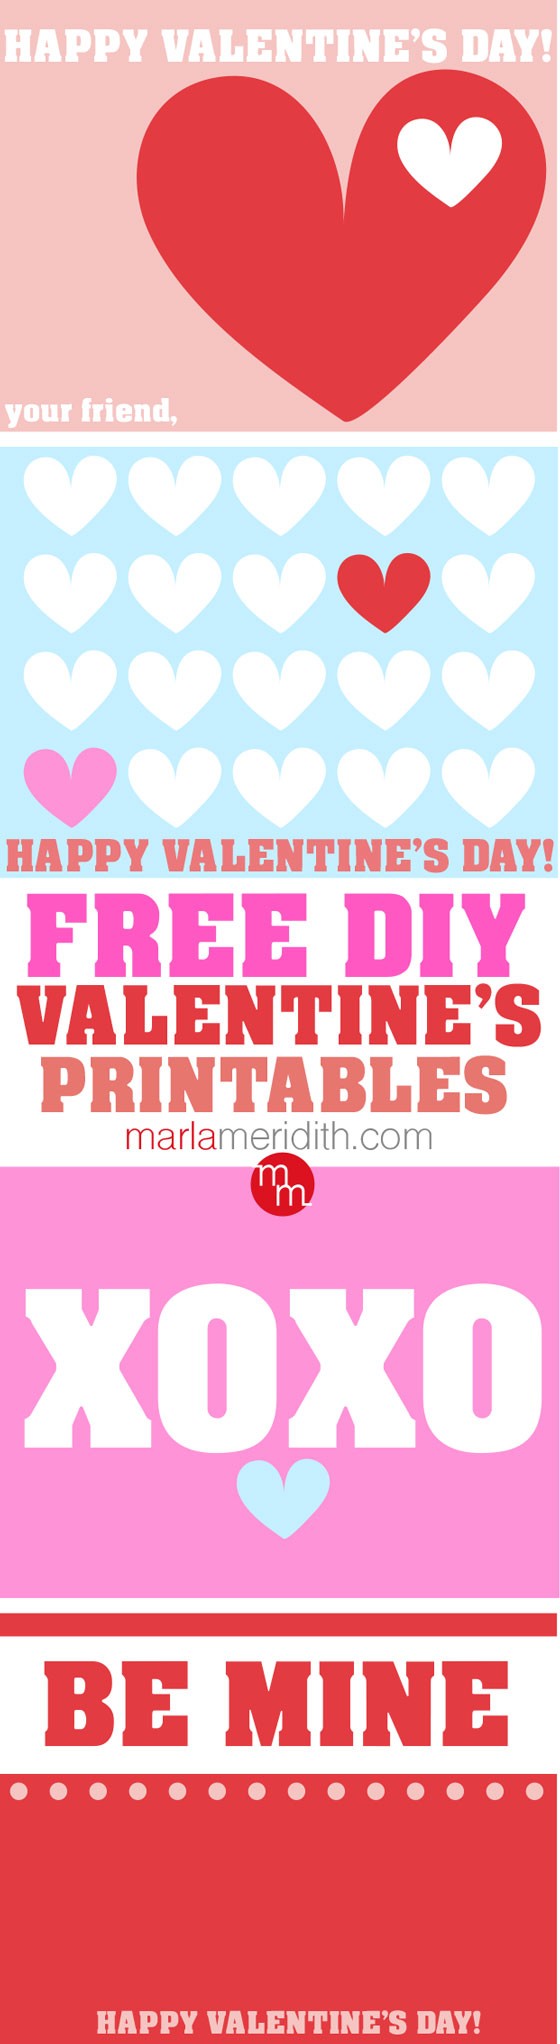 Free DIY Valentine's Printables | Perfect for school parties! MarlaMeridith.com